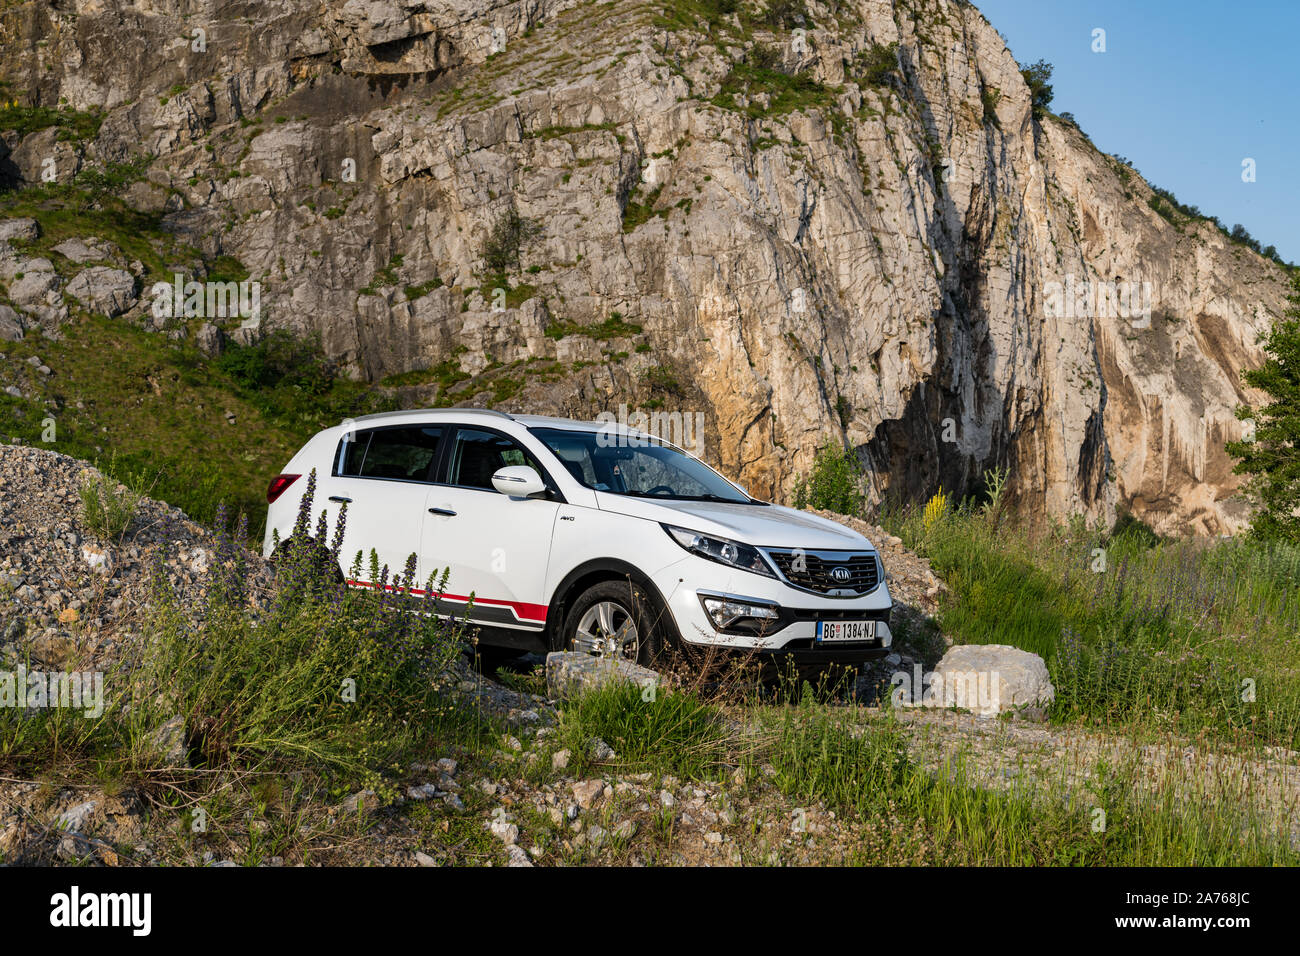 Car Kia Sportage 2.0 CRDI awd or 4x4, white color, on the path the top of the rocky mountain, narrow passage between two large stones. Stock Photo